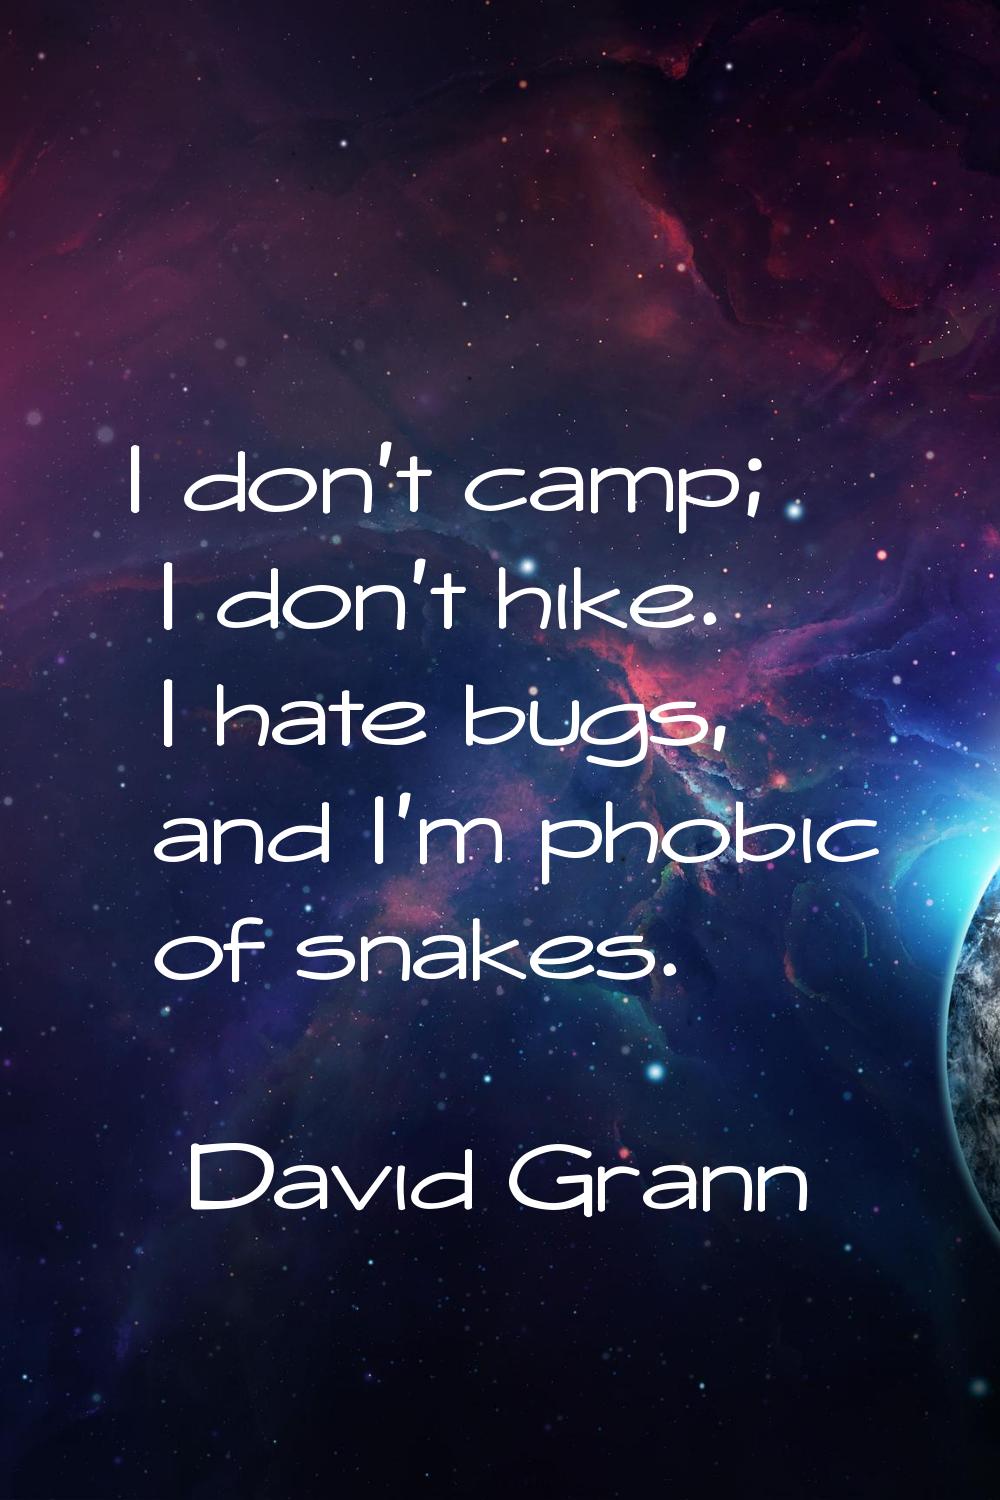 I don't camp; I don't hike. I hate bugs, and I'm phobic of snakes.